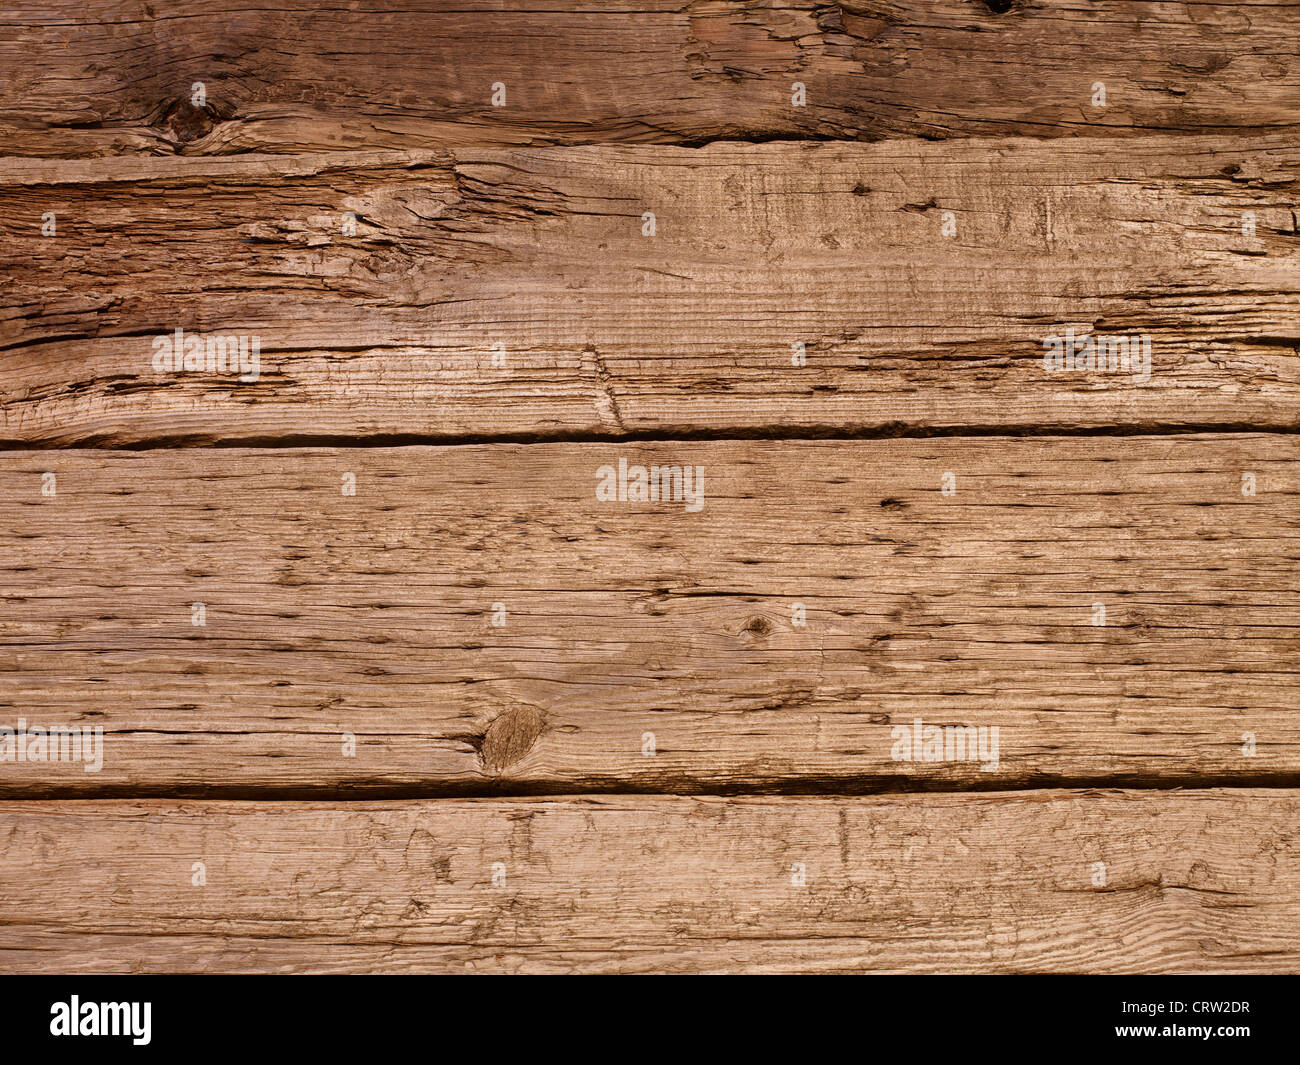 wooden railway sleepers making a textured wood background Stock Photo